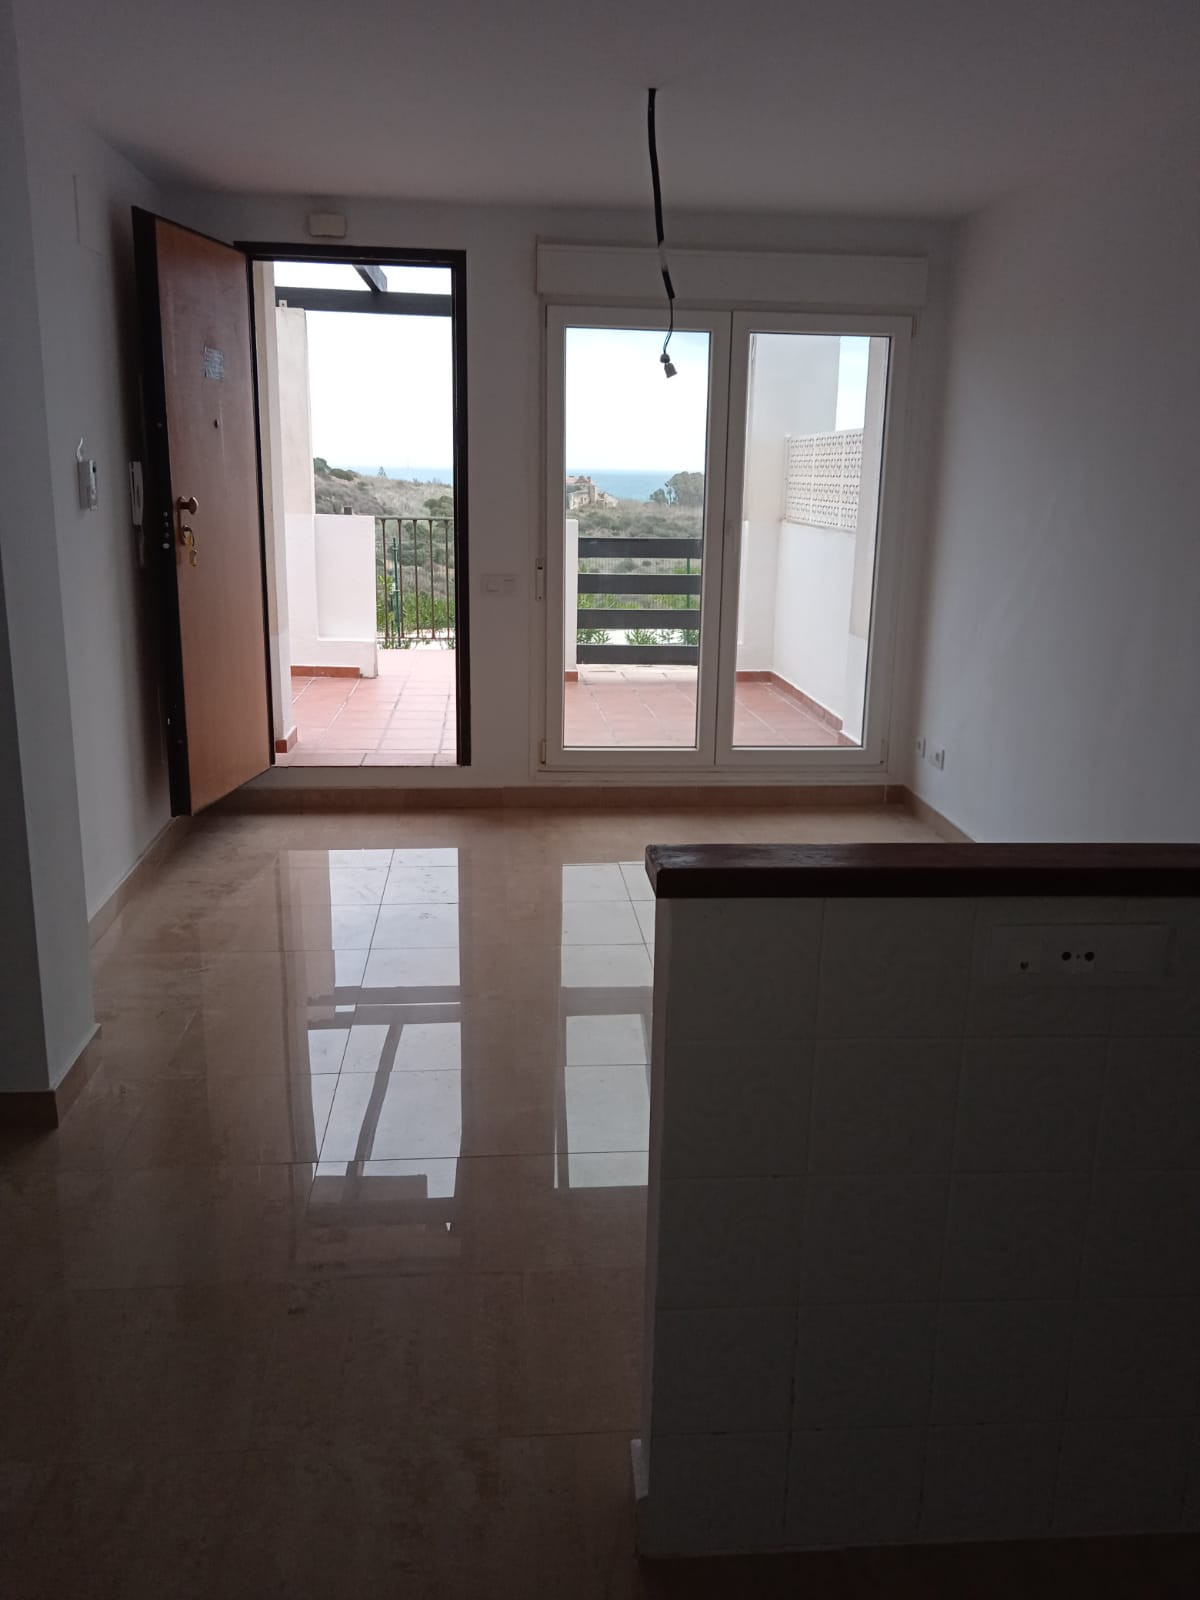 2 Bedroom Penthouse Apartment For Sale Manilva